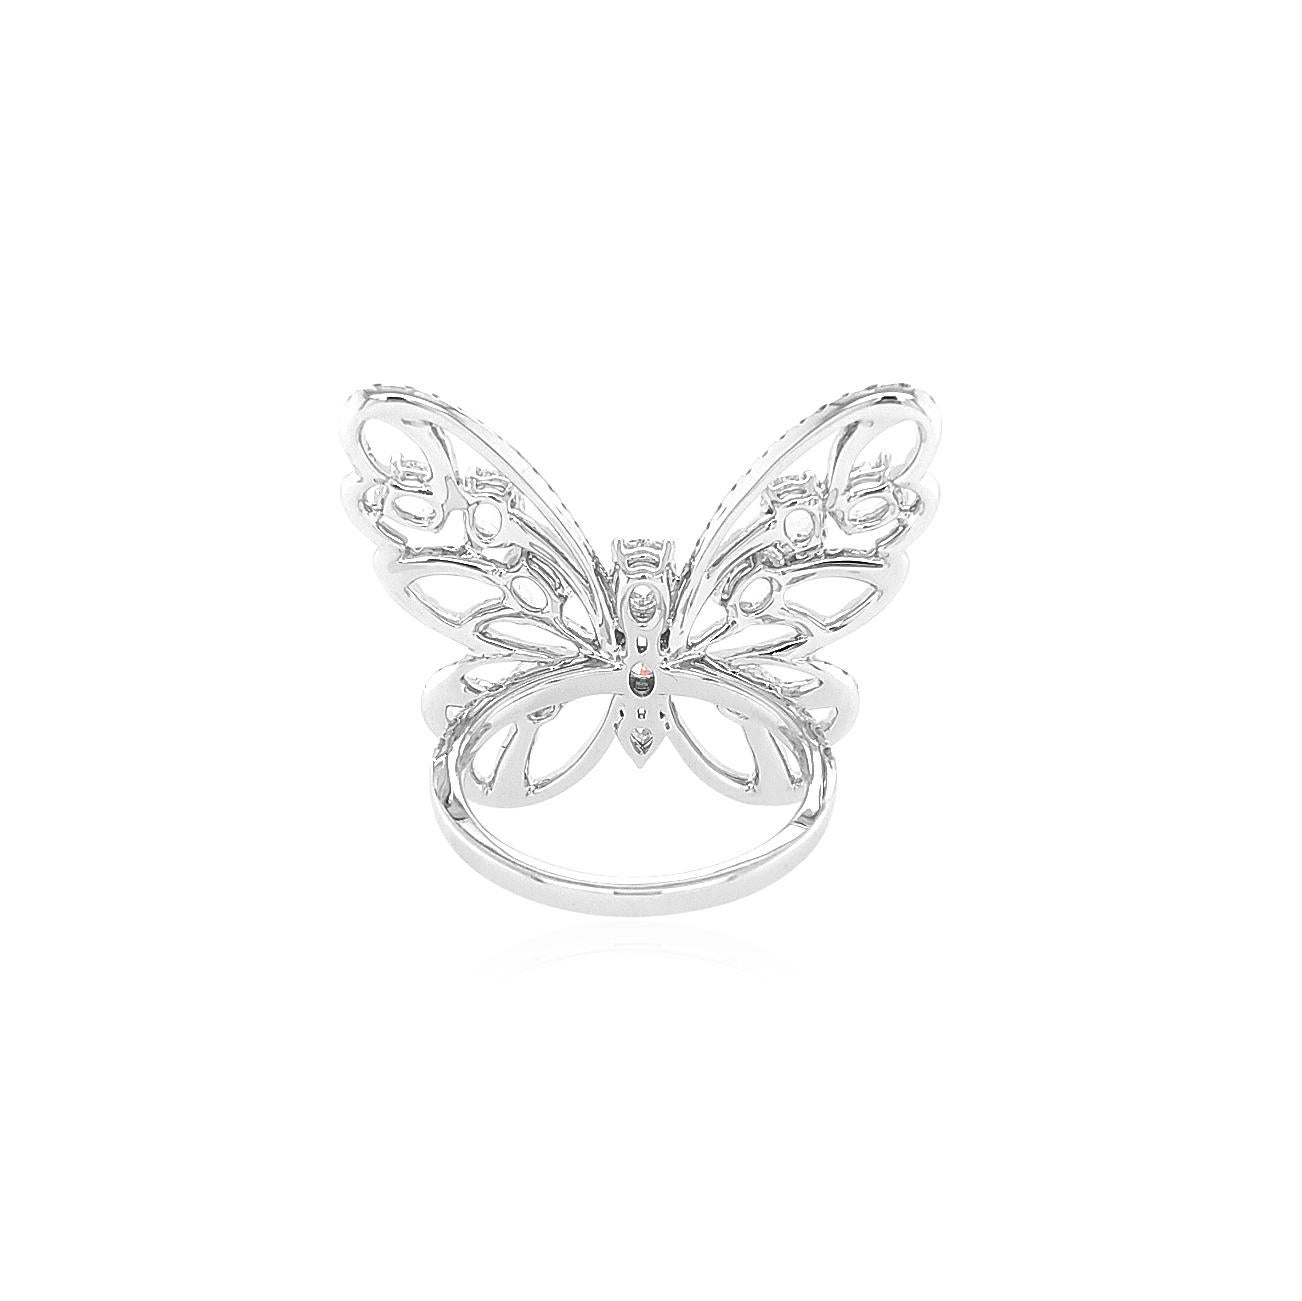 This mesmeric K18 White Gold cocktail ring features exceptional natural Rose-Cut White Diamonds at its forefront. The incredibly Rose Cut diamonds are perfectly accentuated by the diamond butterfly motif which surrounds them. Bold, yet intricate,